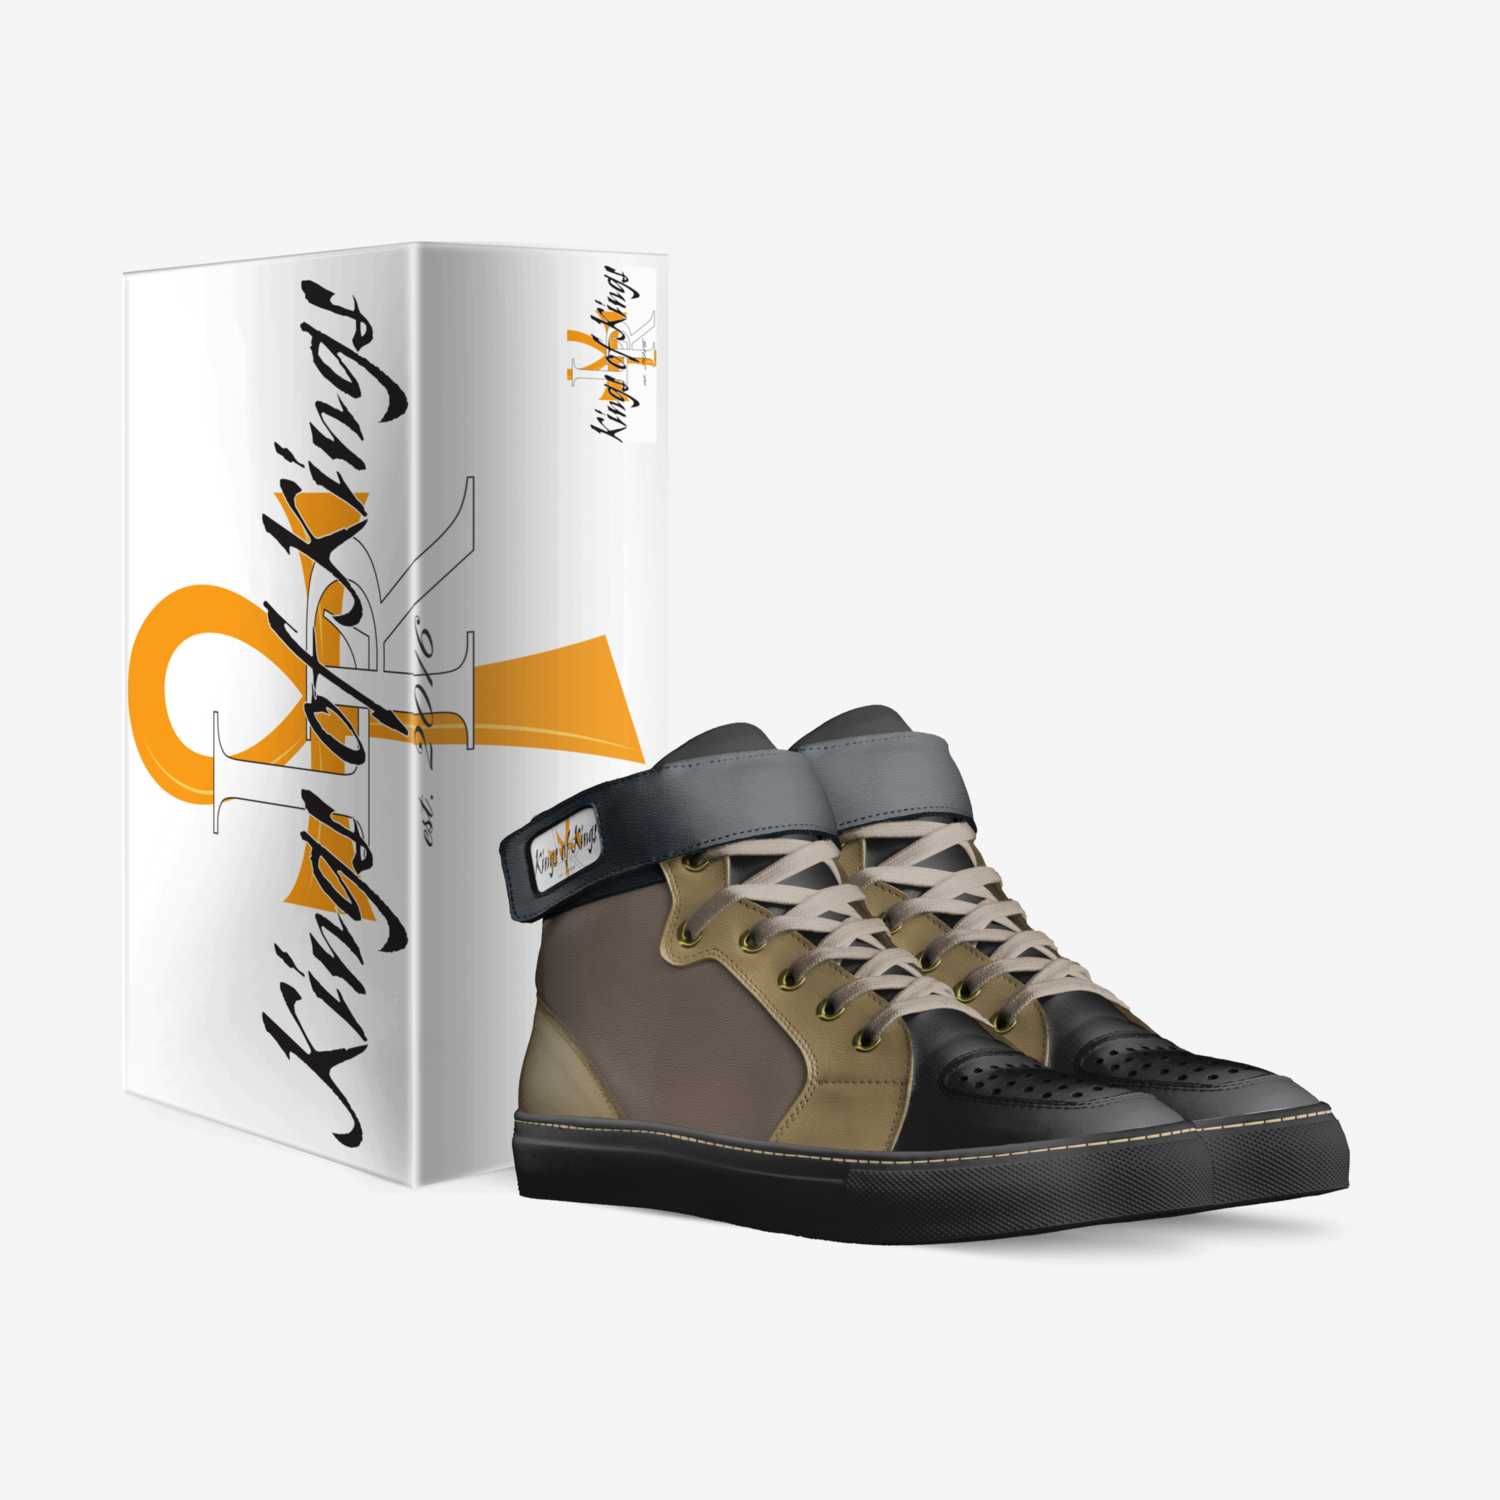 KingsOfKings custom made in Italy shoes by Limitlessroyalty Brand | Box view